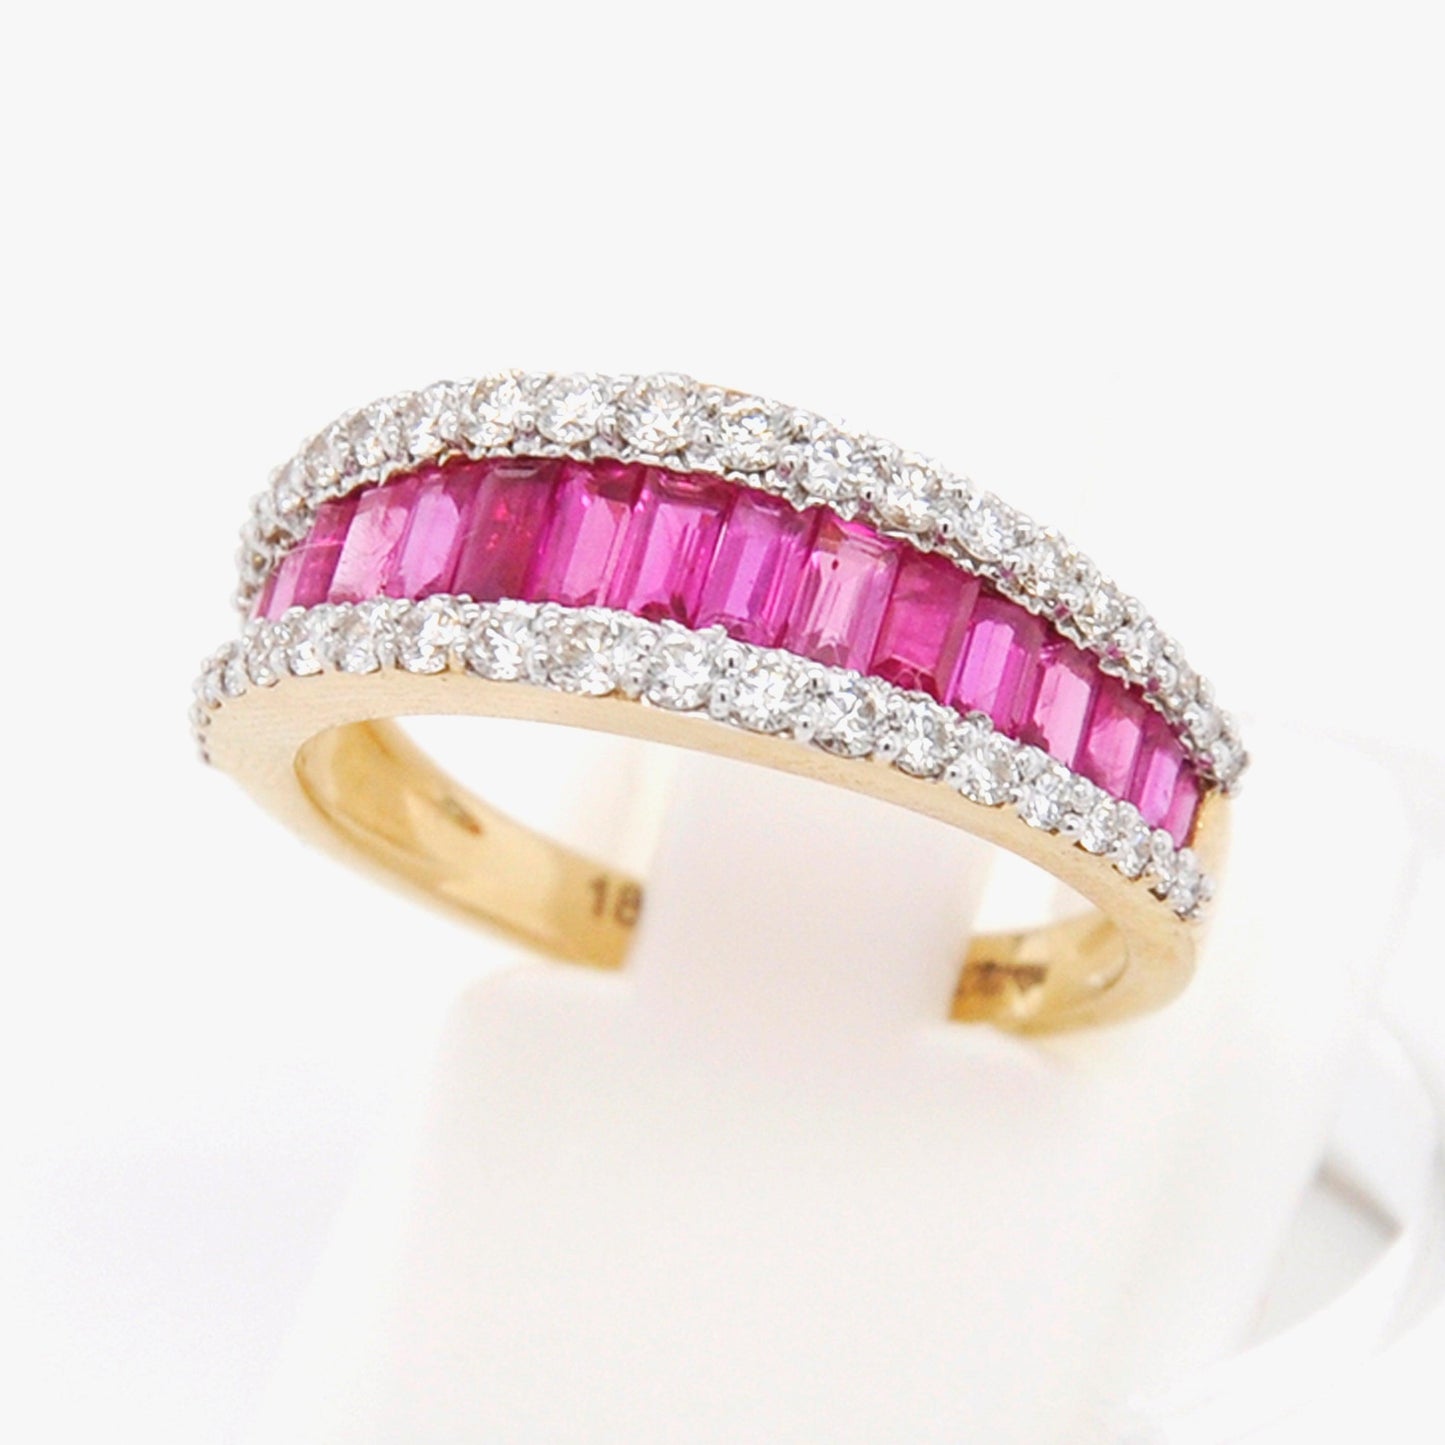 Natural ruby ring with band setting